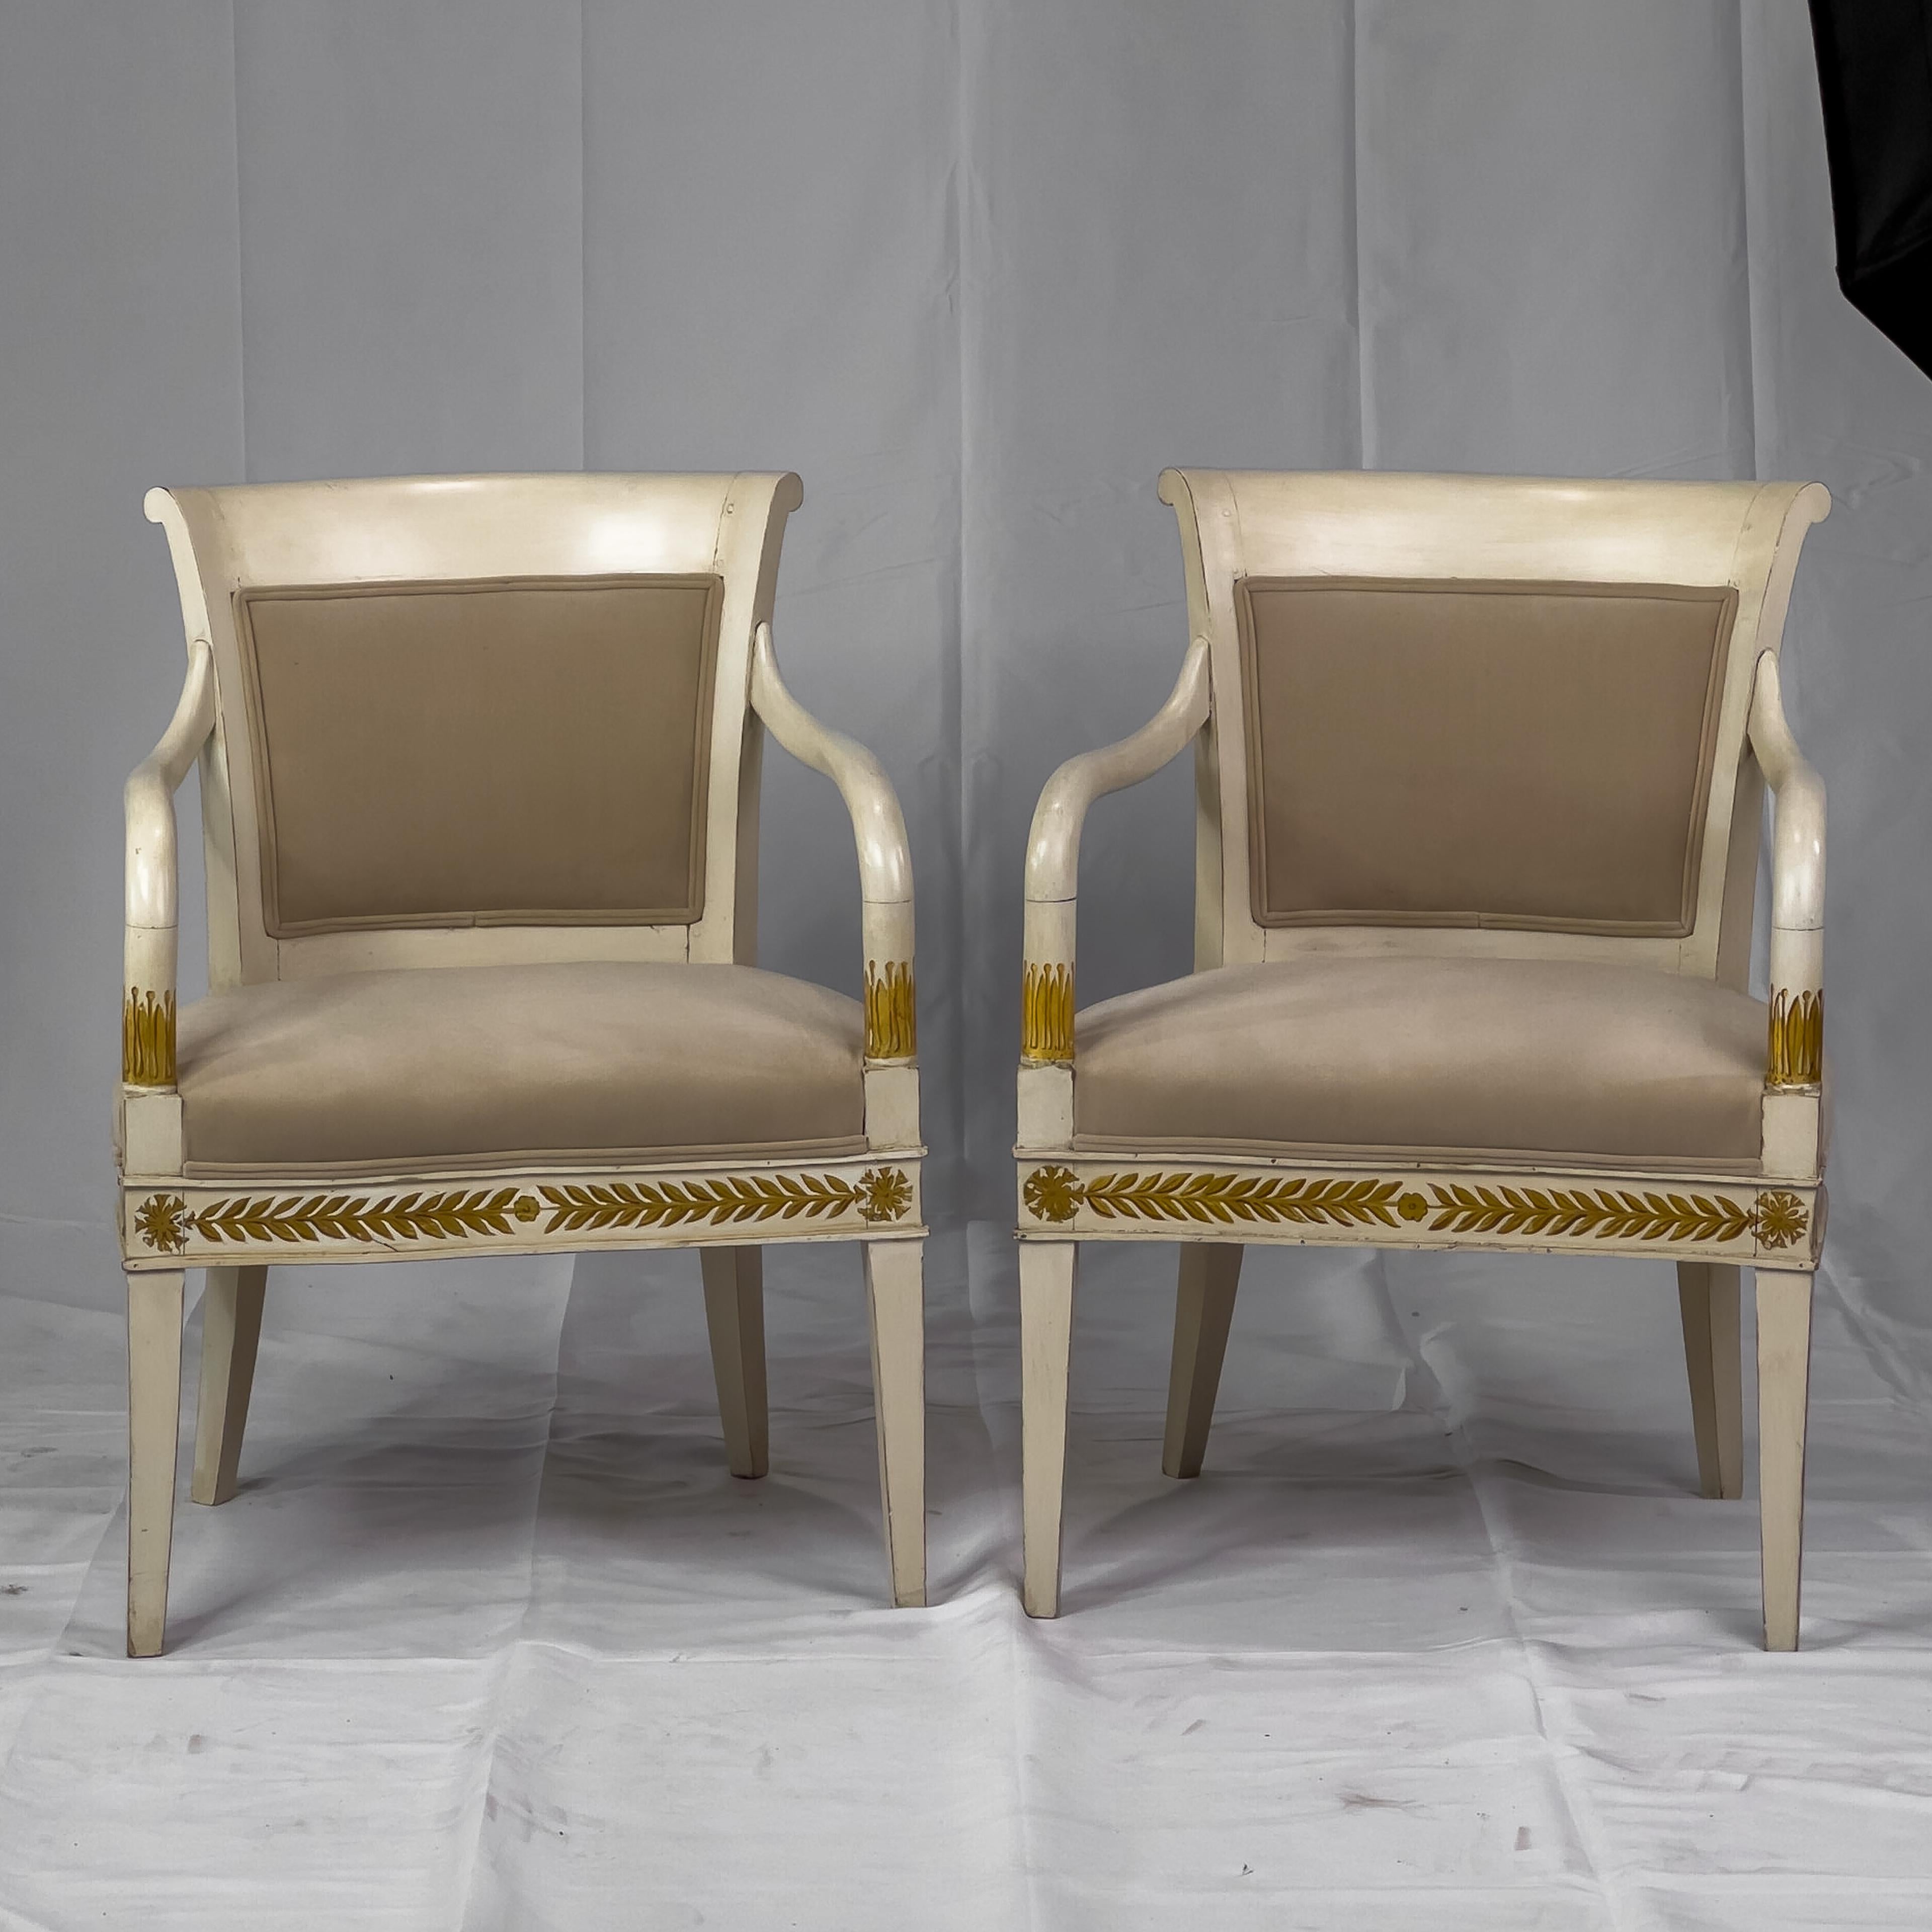 Pair of Italian Neoclassical Armchairs In Good Condition For Sale In Houston, TX